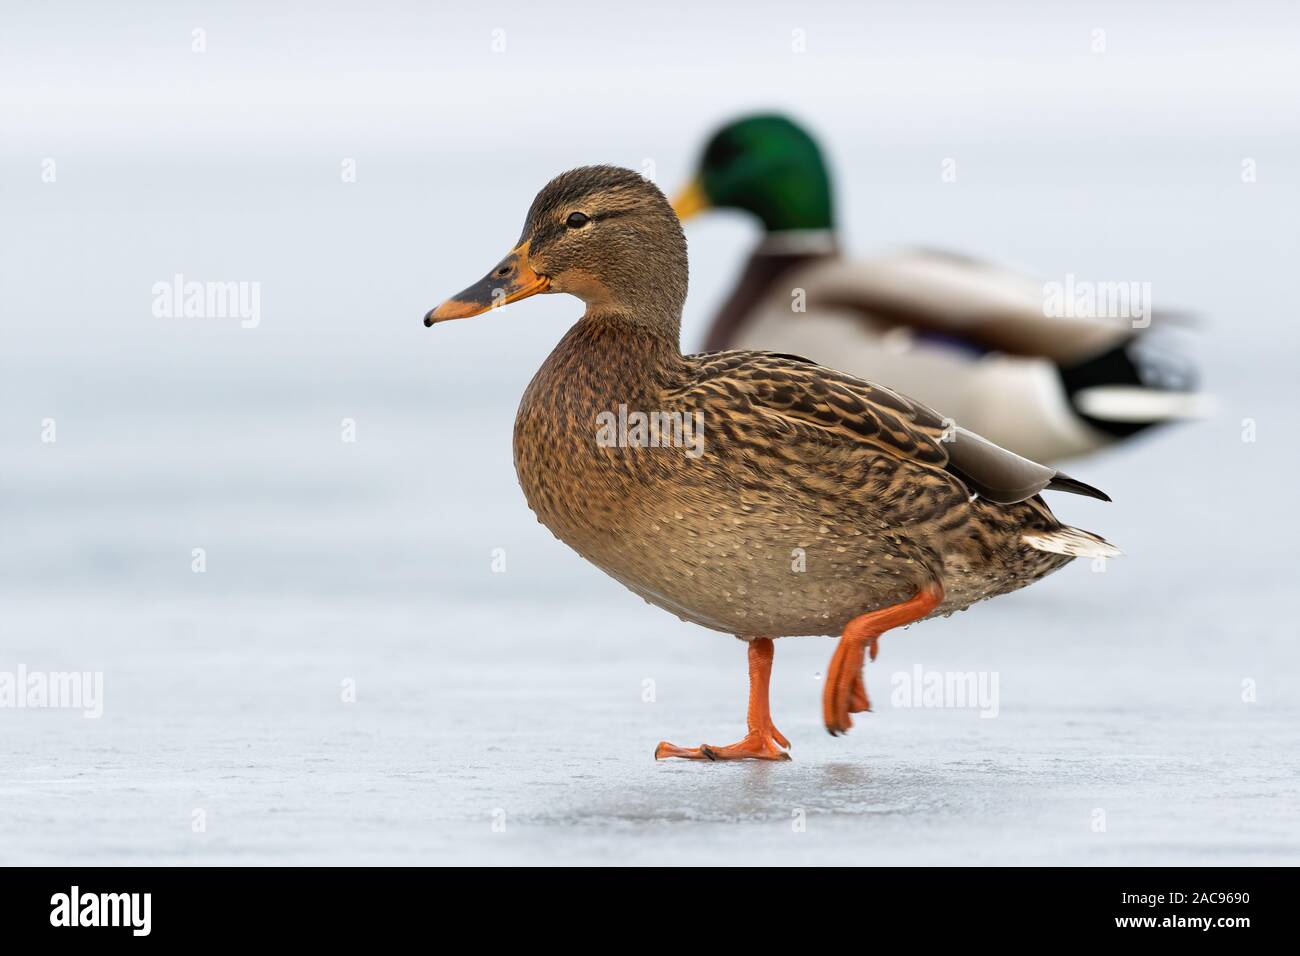 Two wild ducks approaching together on ice in wintertime. Stock Photo